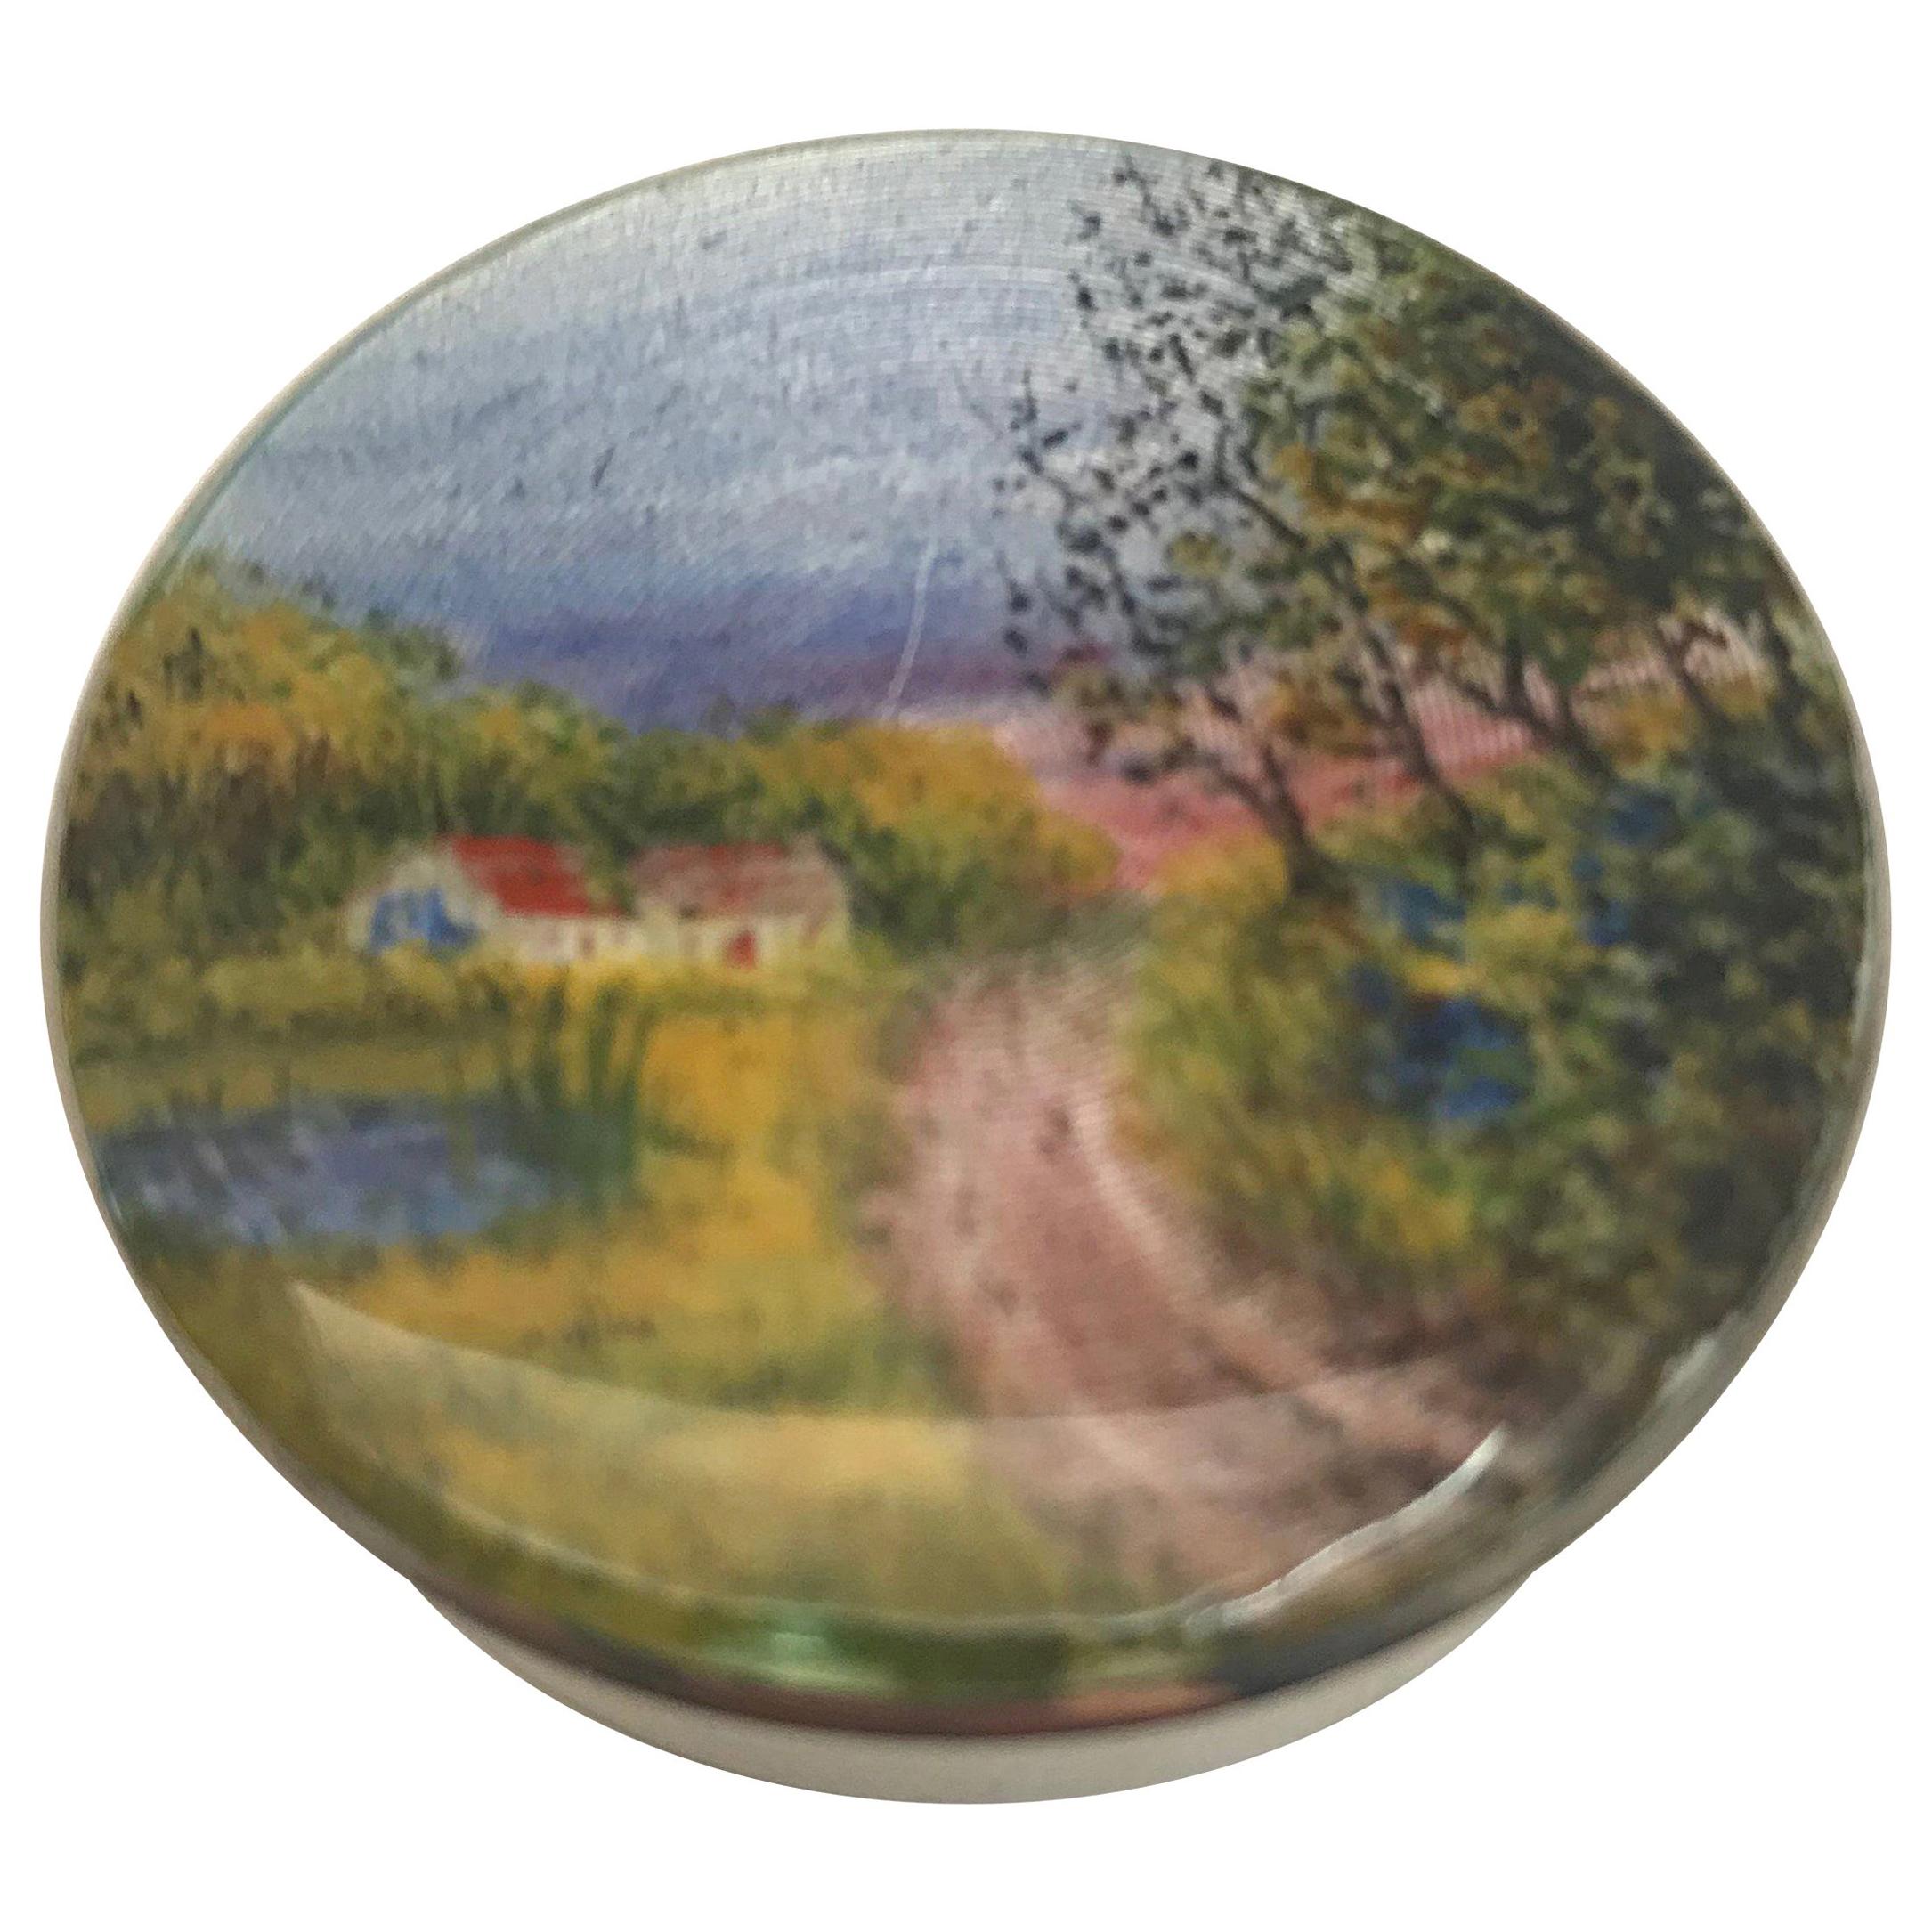 Silver and Enamel Box with Country Scene on Lid